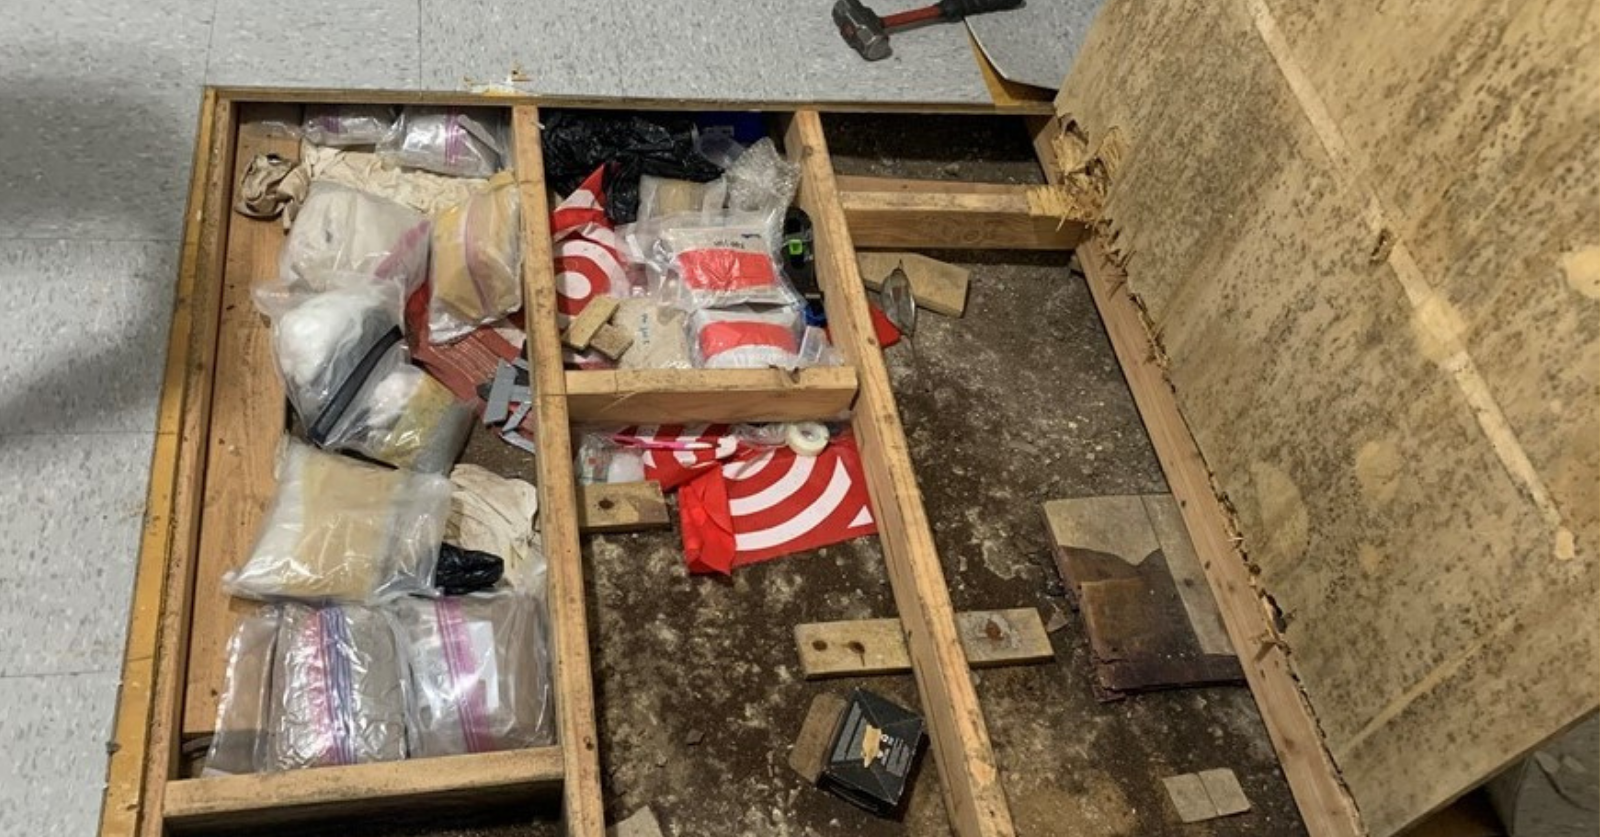 NYPD releases photos of more drugs found inside Bronx day care, after discovering a trap floor